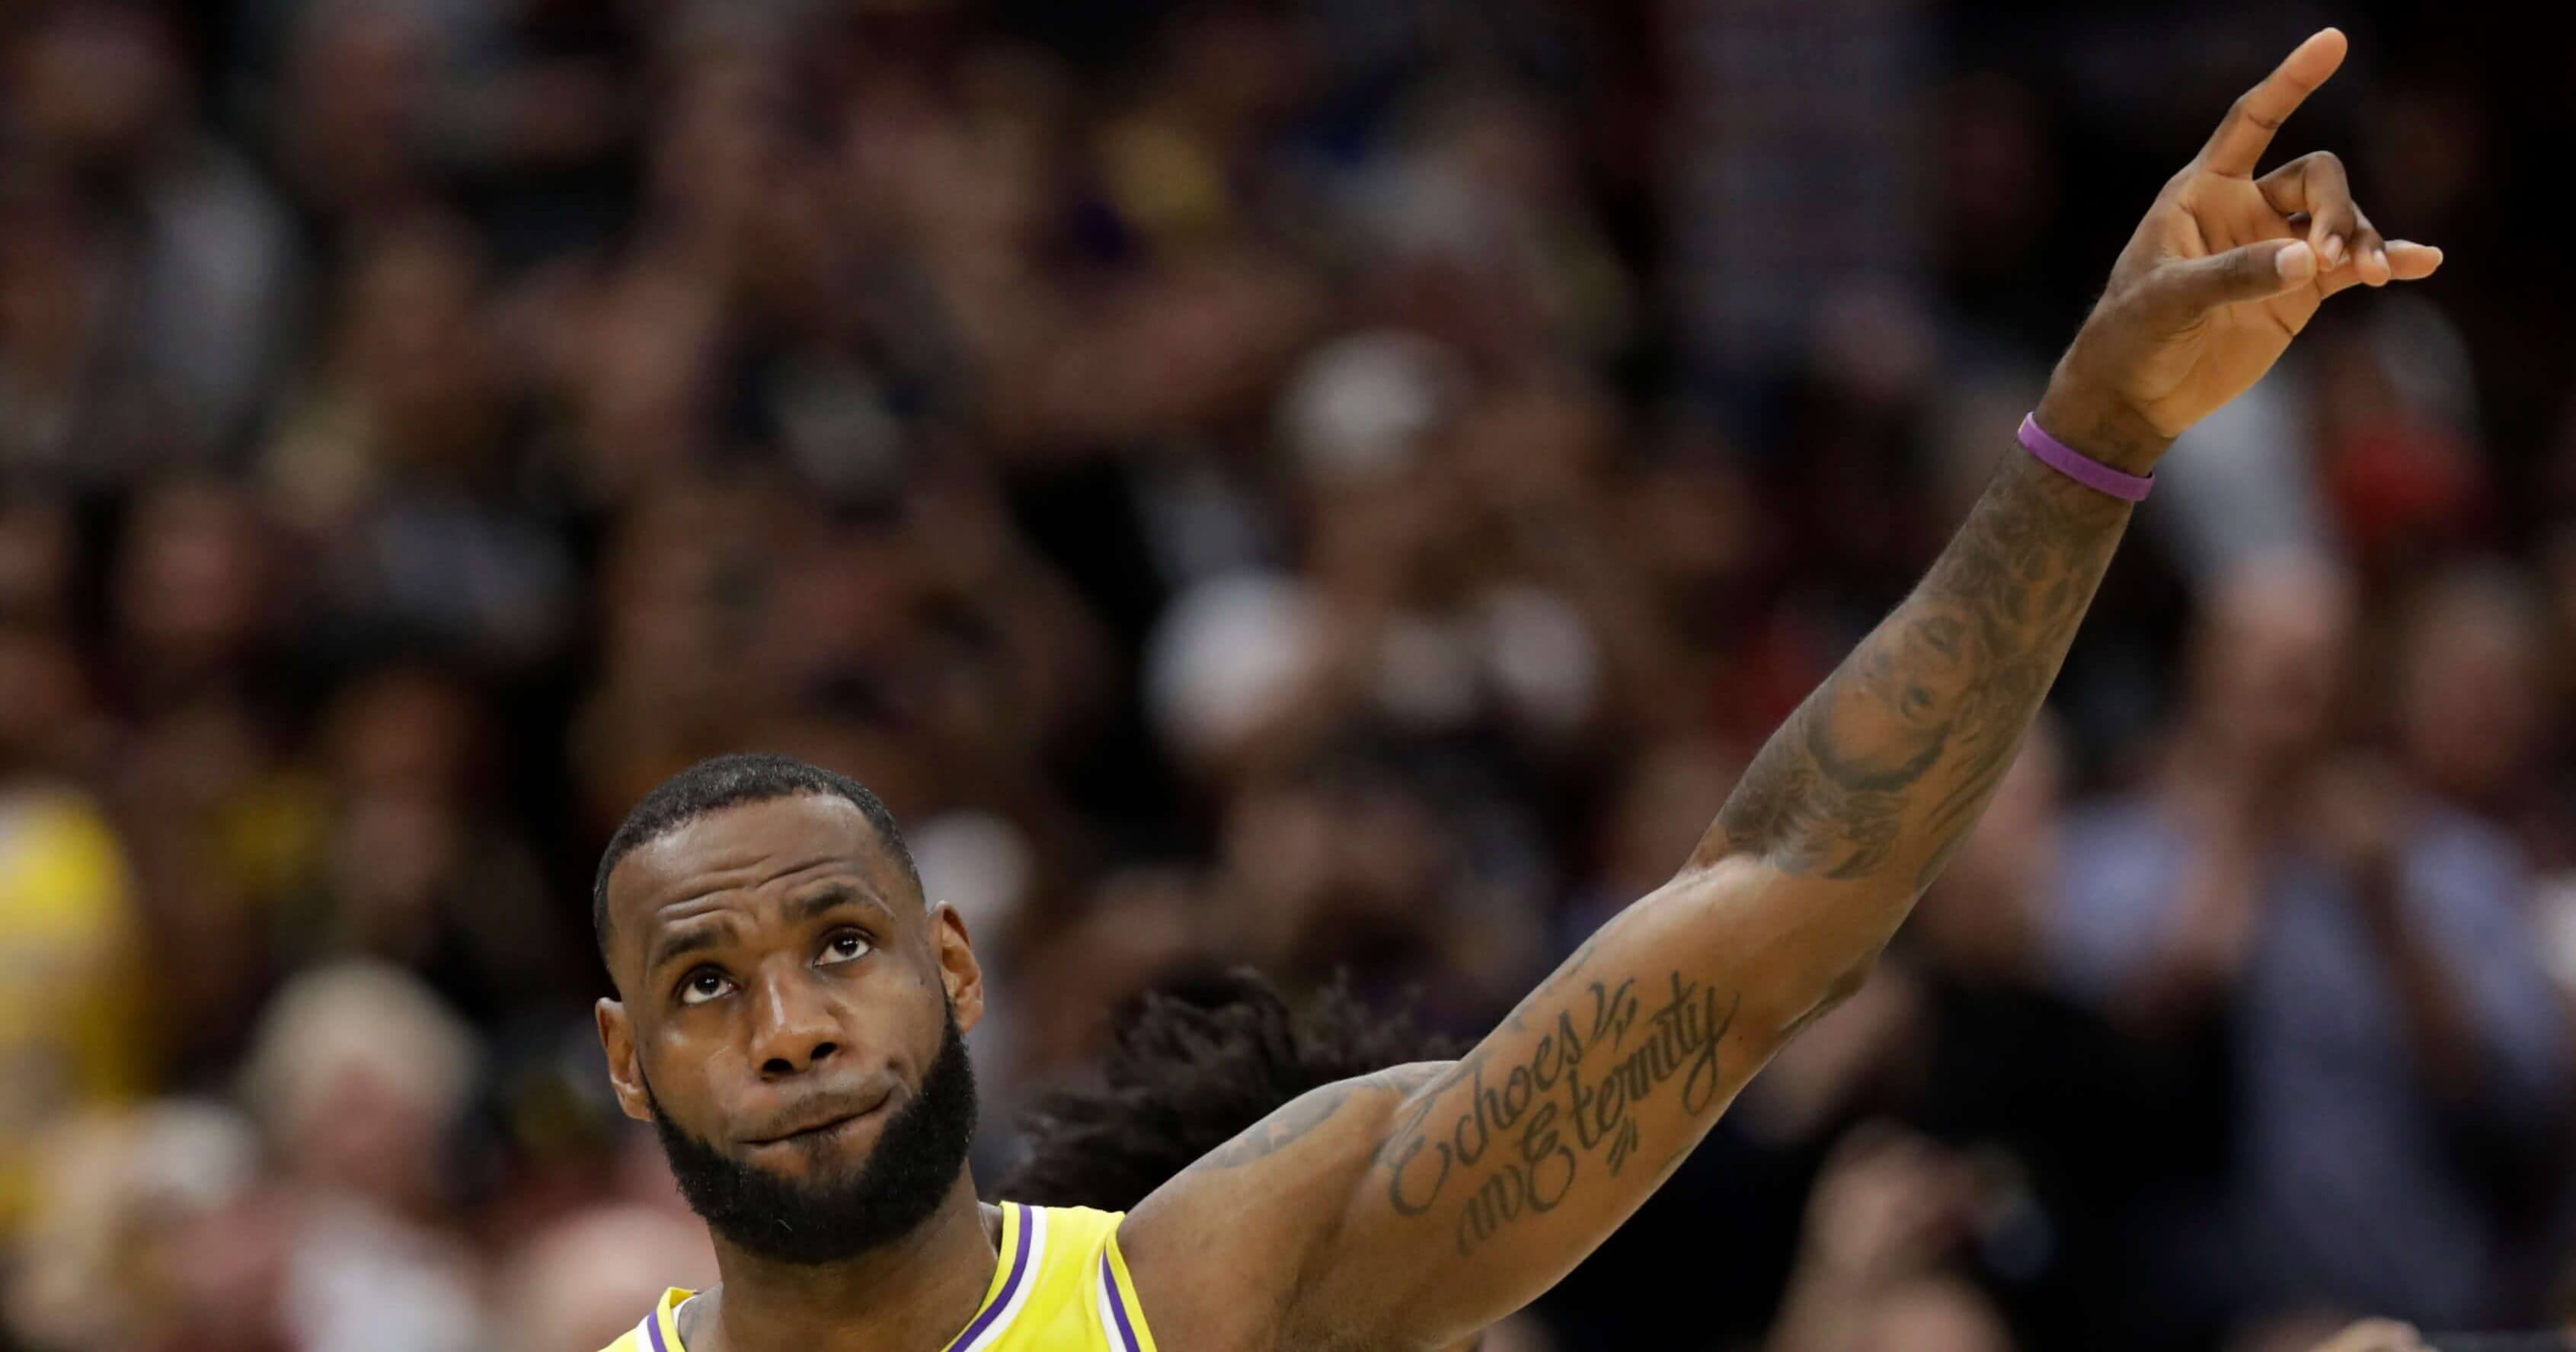 Los Angeles Lakers' LeBron James acknowledges the Cleveland fans during a video tribute to James during the first half of the game between the Lakers and the Cavaliers on Wednesday in Cleveland.